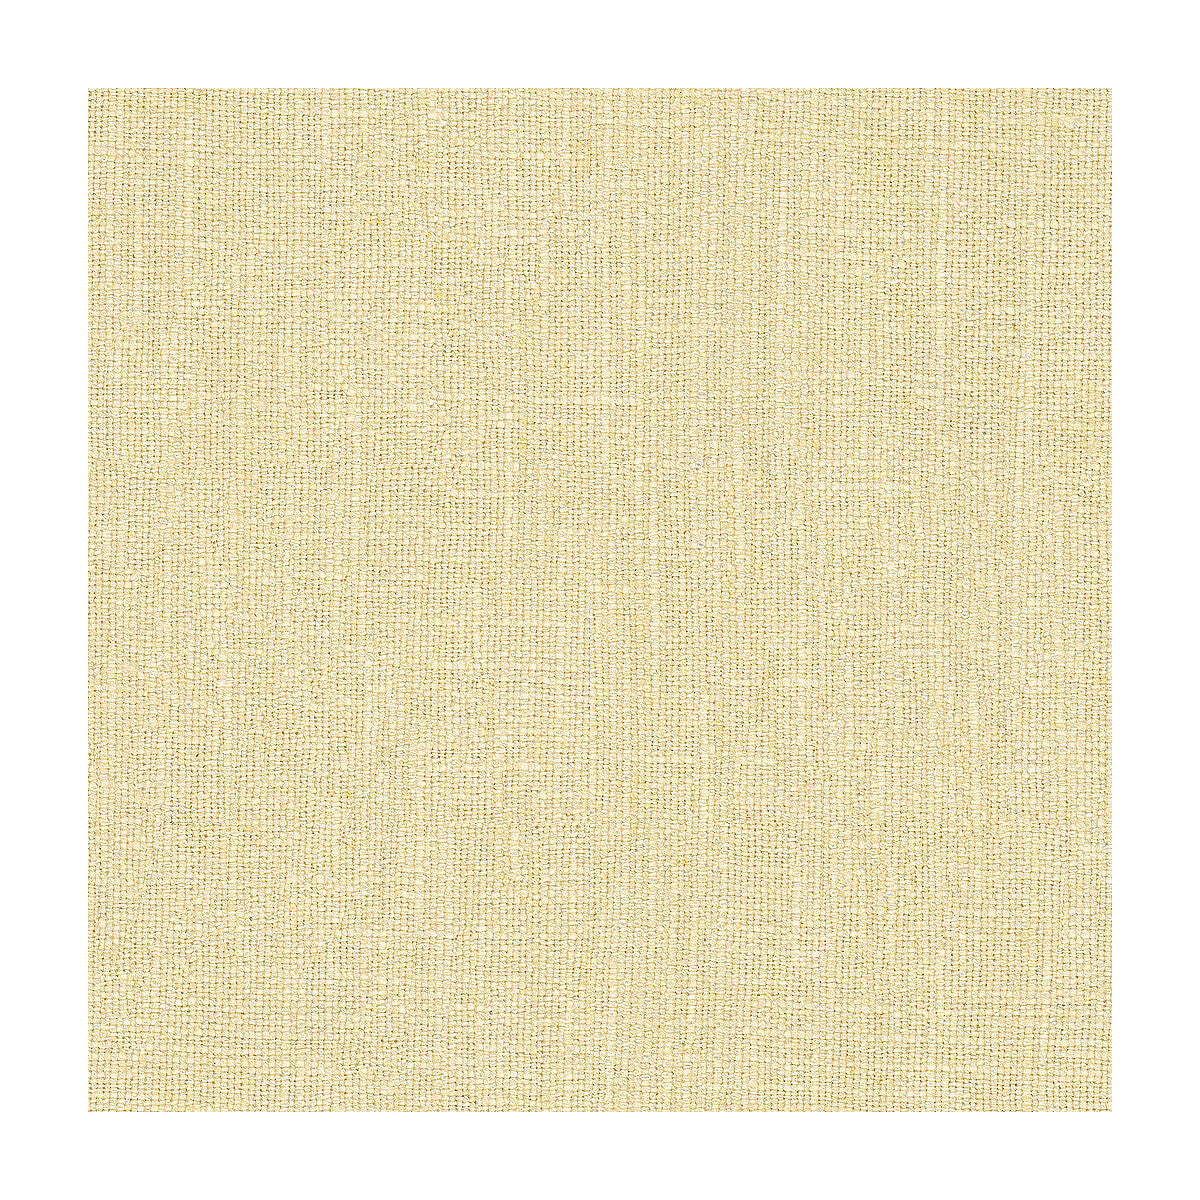 Kravet Basics fabric in 32612-111 color - pattern 32612.111.0 - by Kravet Basics in the Perfect Plains collection